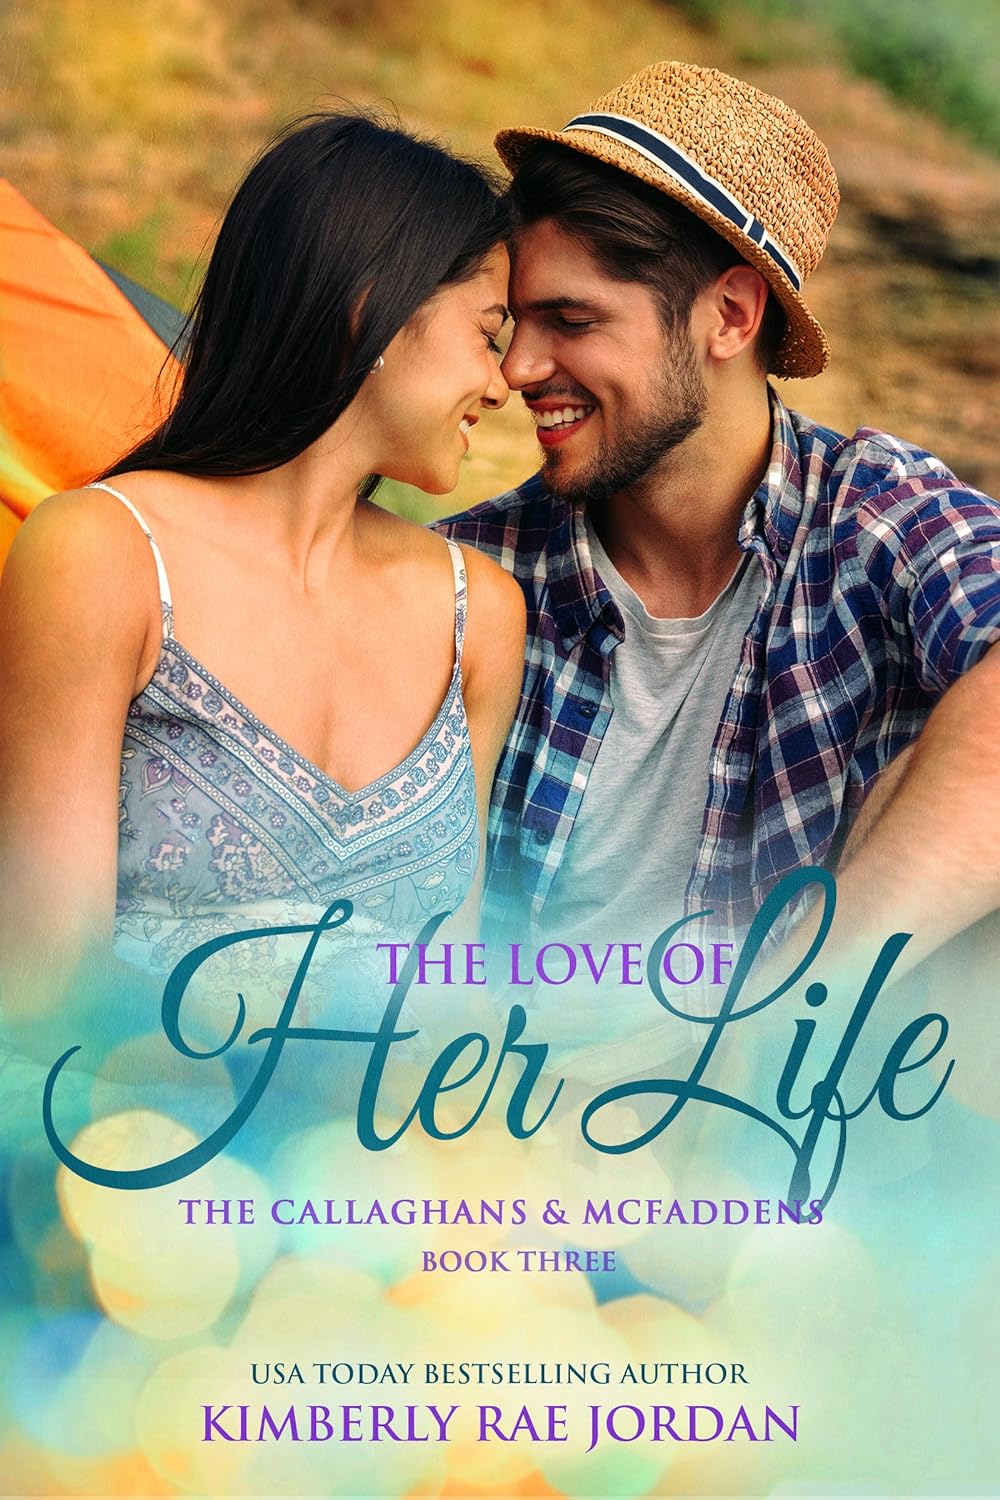 The Love of Her Life: A Christian Romance